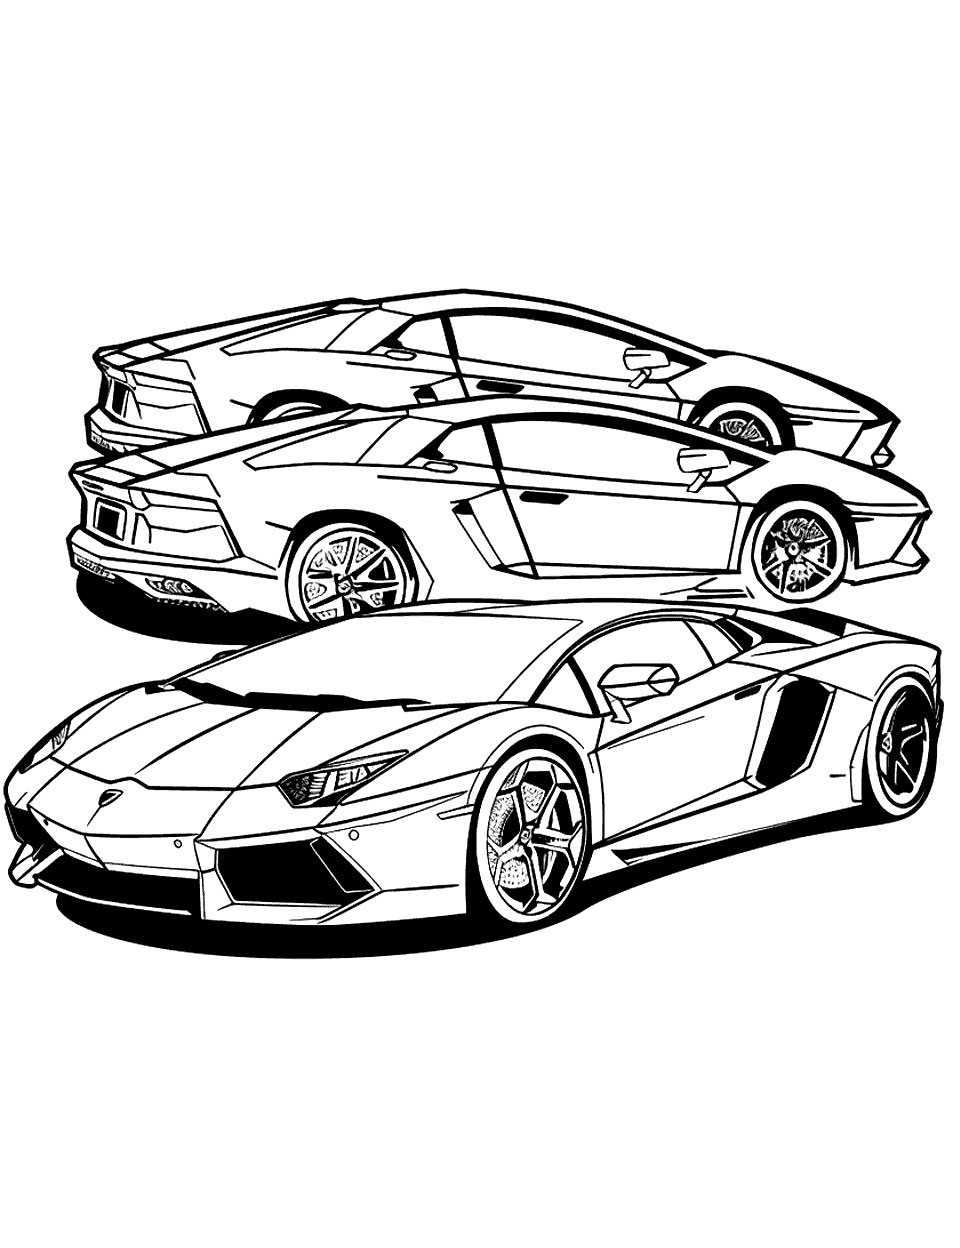 Cool Lamborghini Gathering Coloring Page - A group of cool Lamborghini cars parked together.